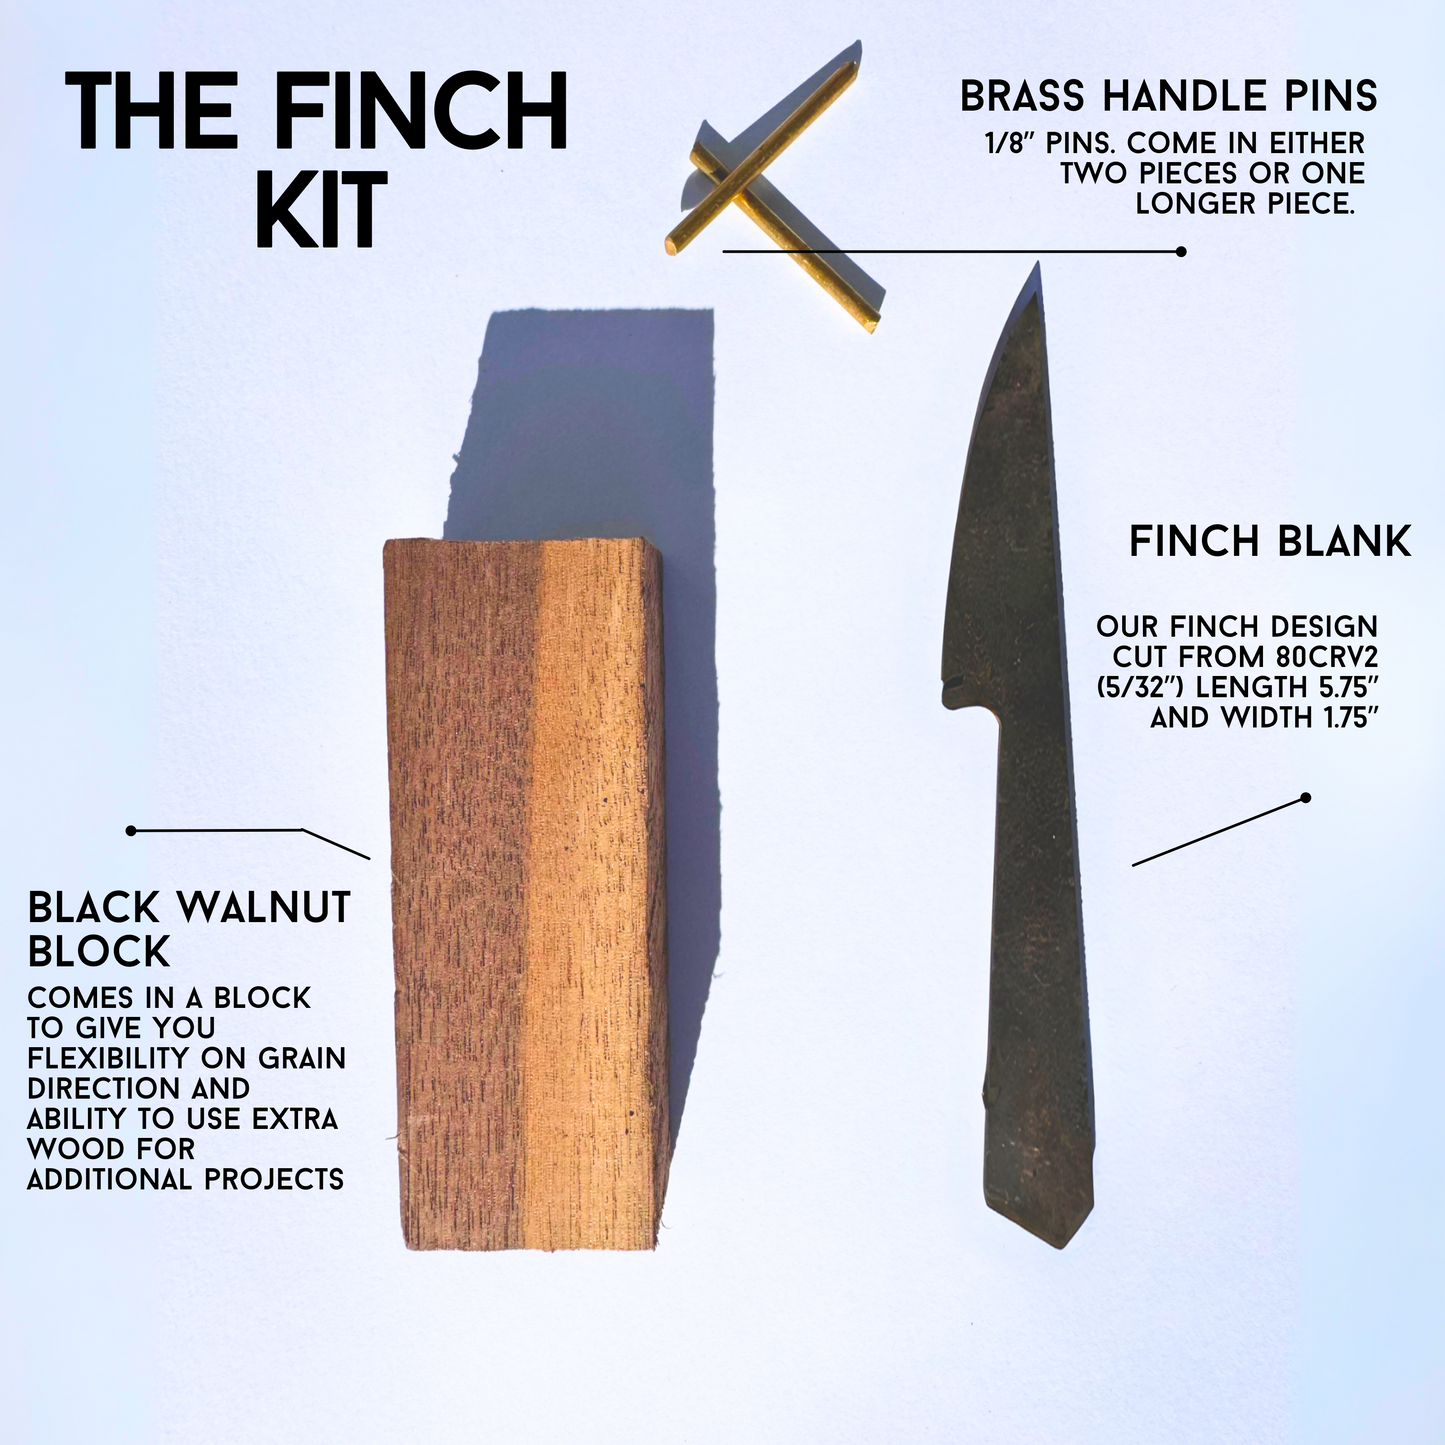 The Finch Kit